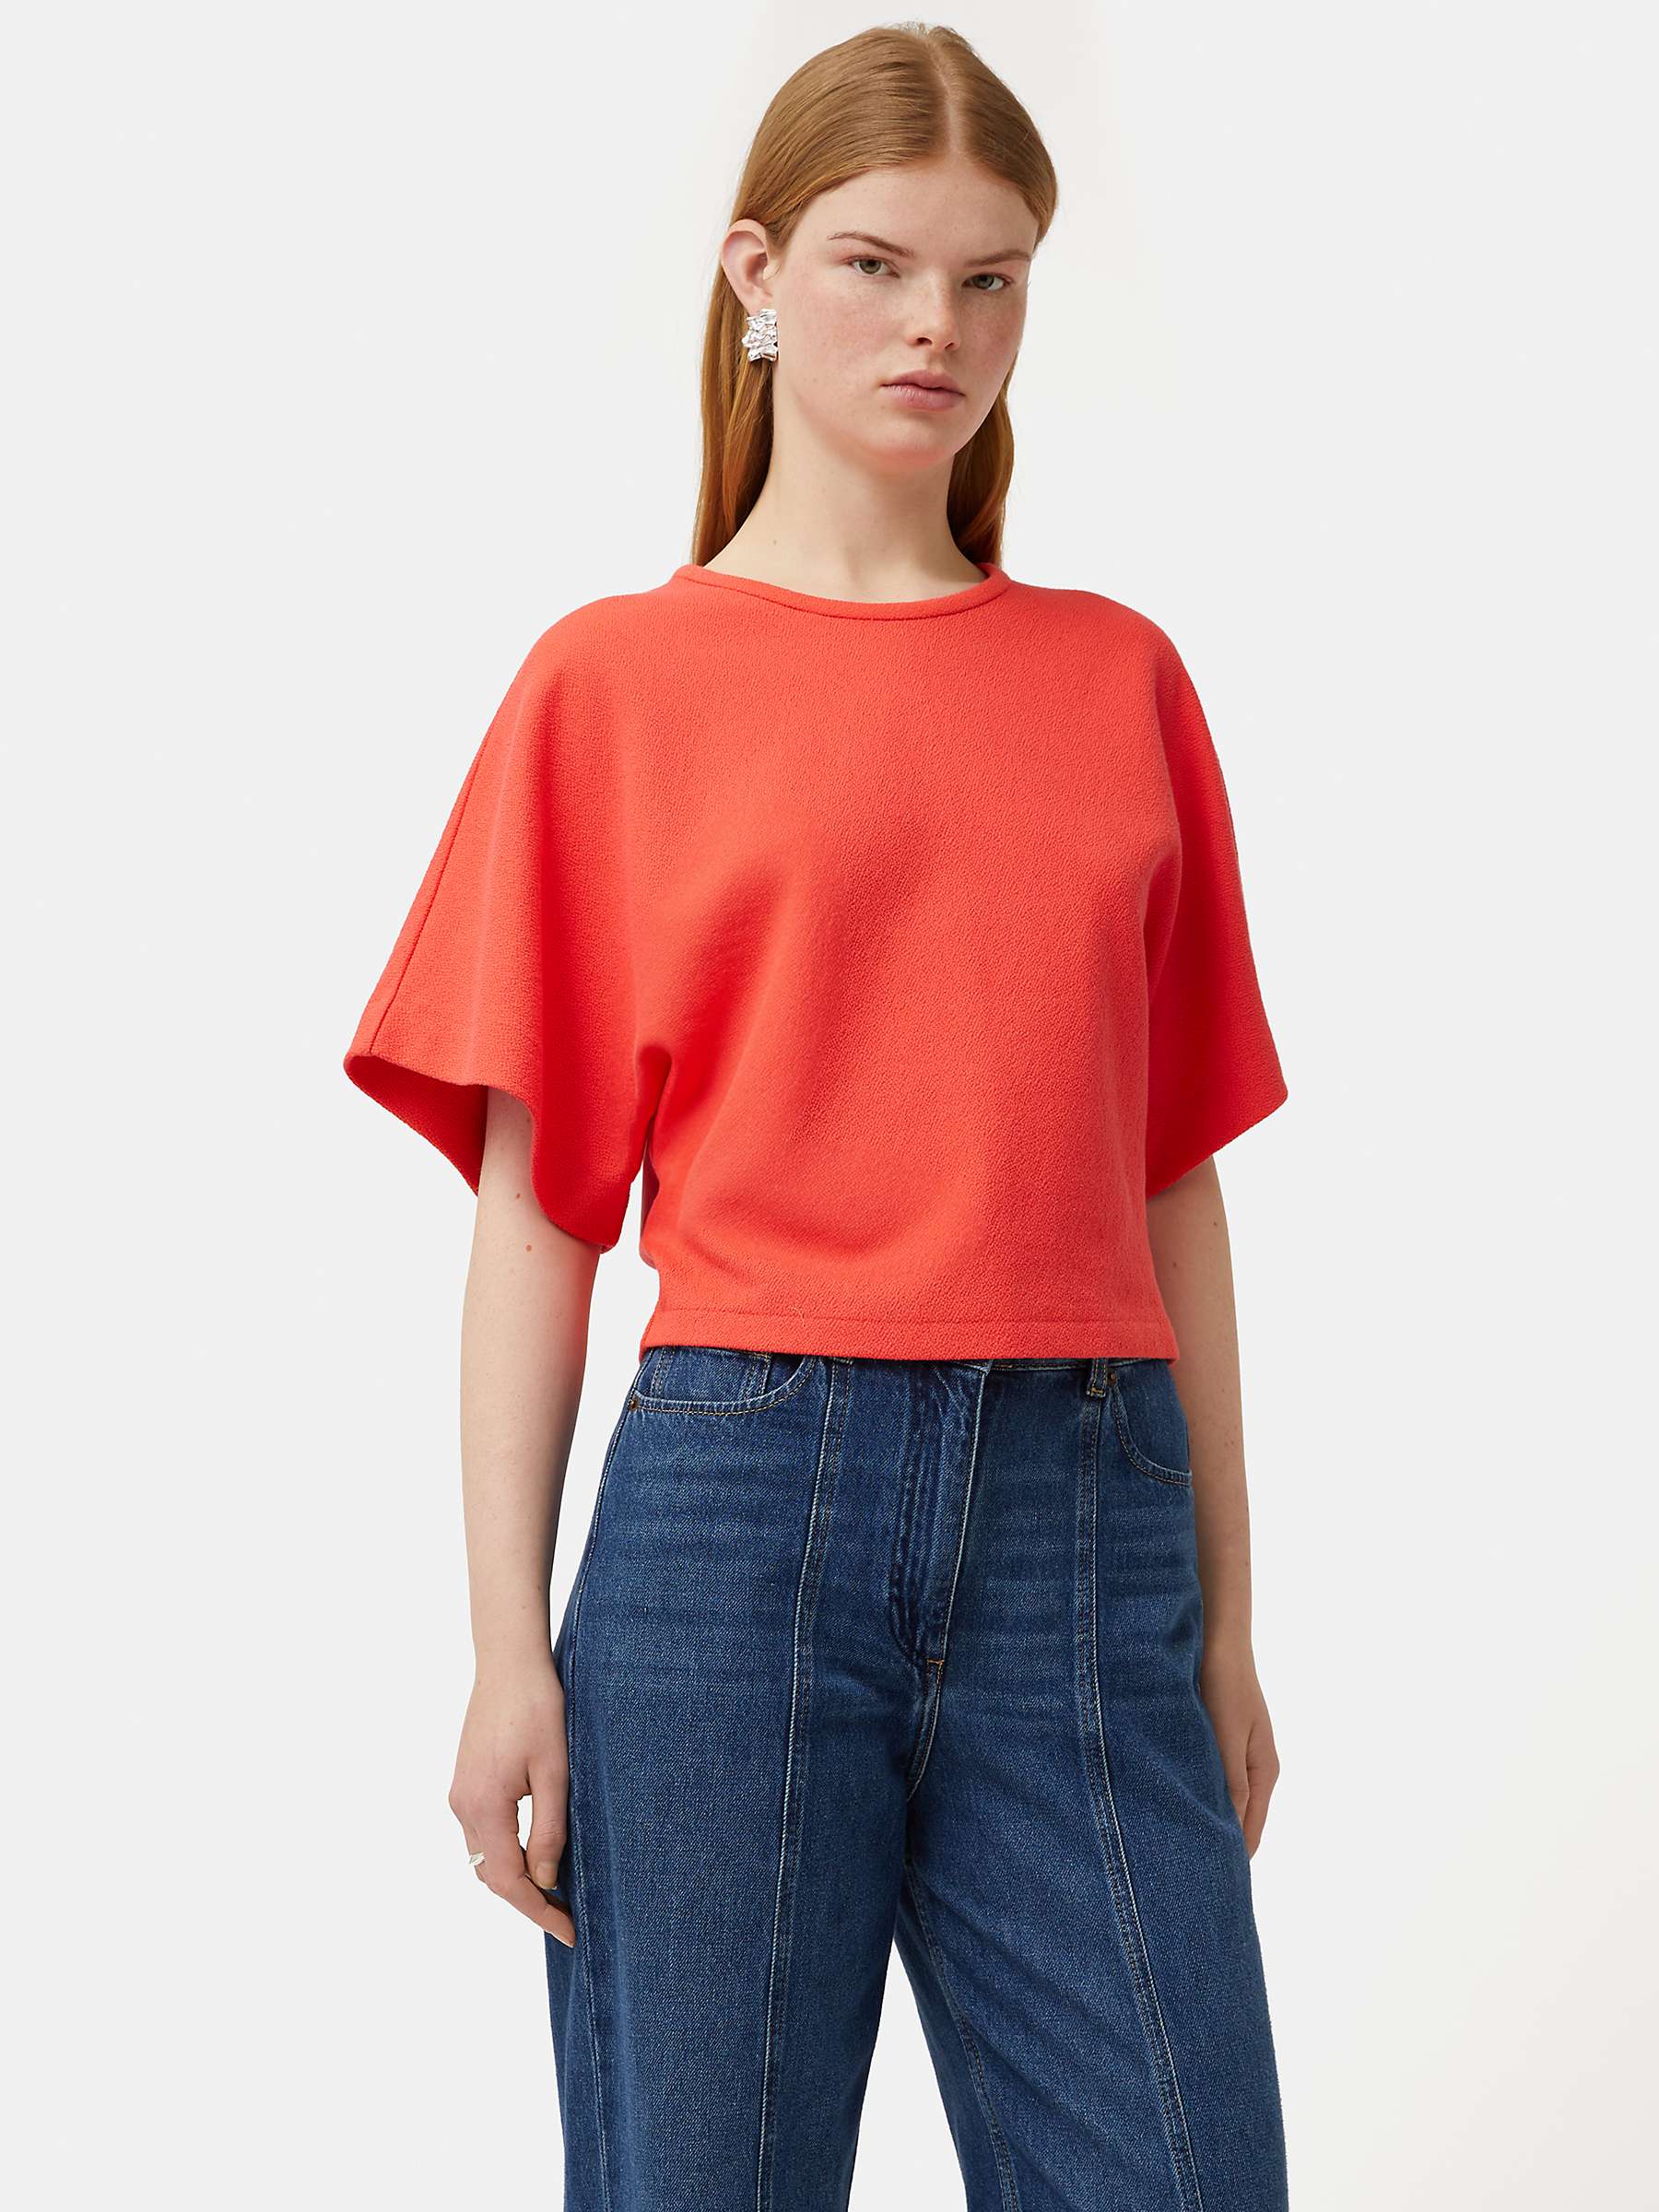 Buy Jigsaw Textured Jersey Top, Coral Online at johnlewis.com